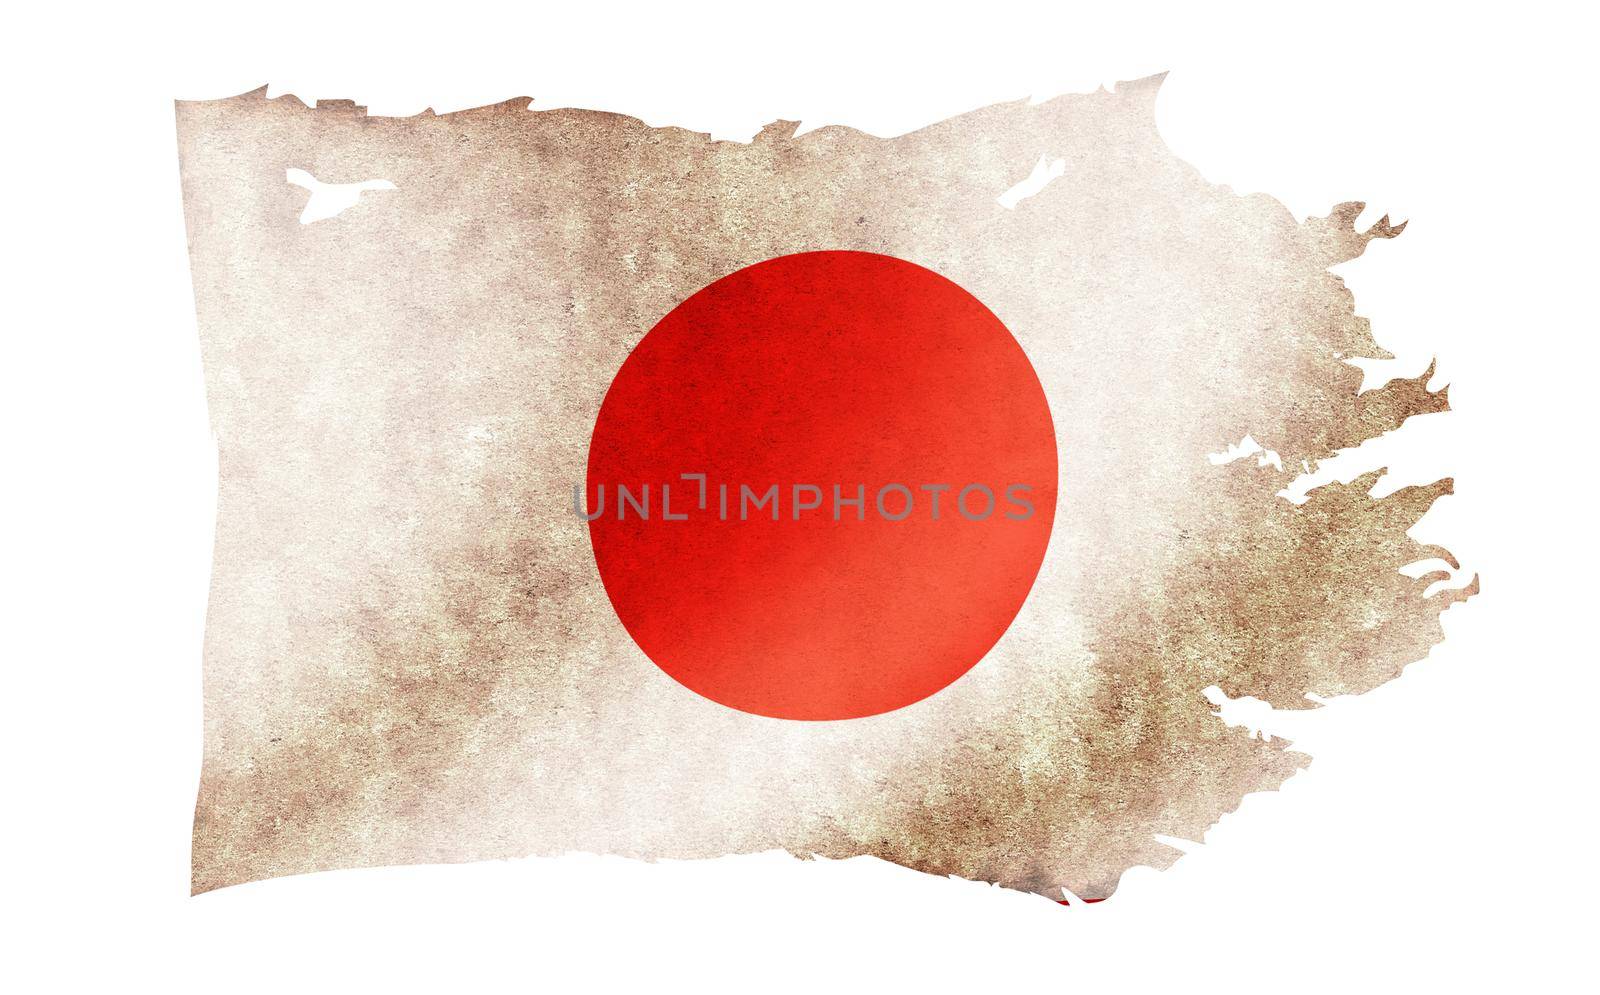 Dirty and torn country flag illustration / Japan